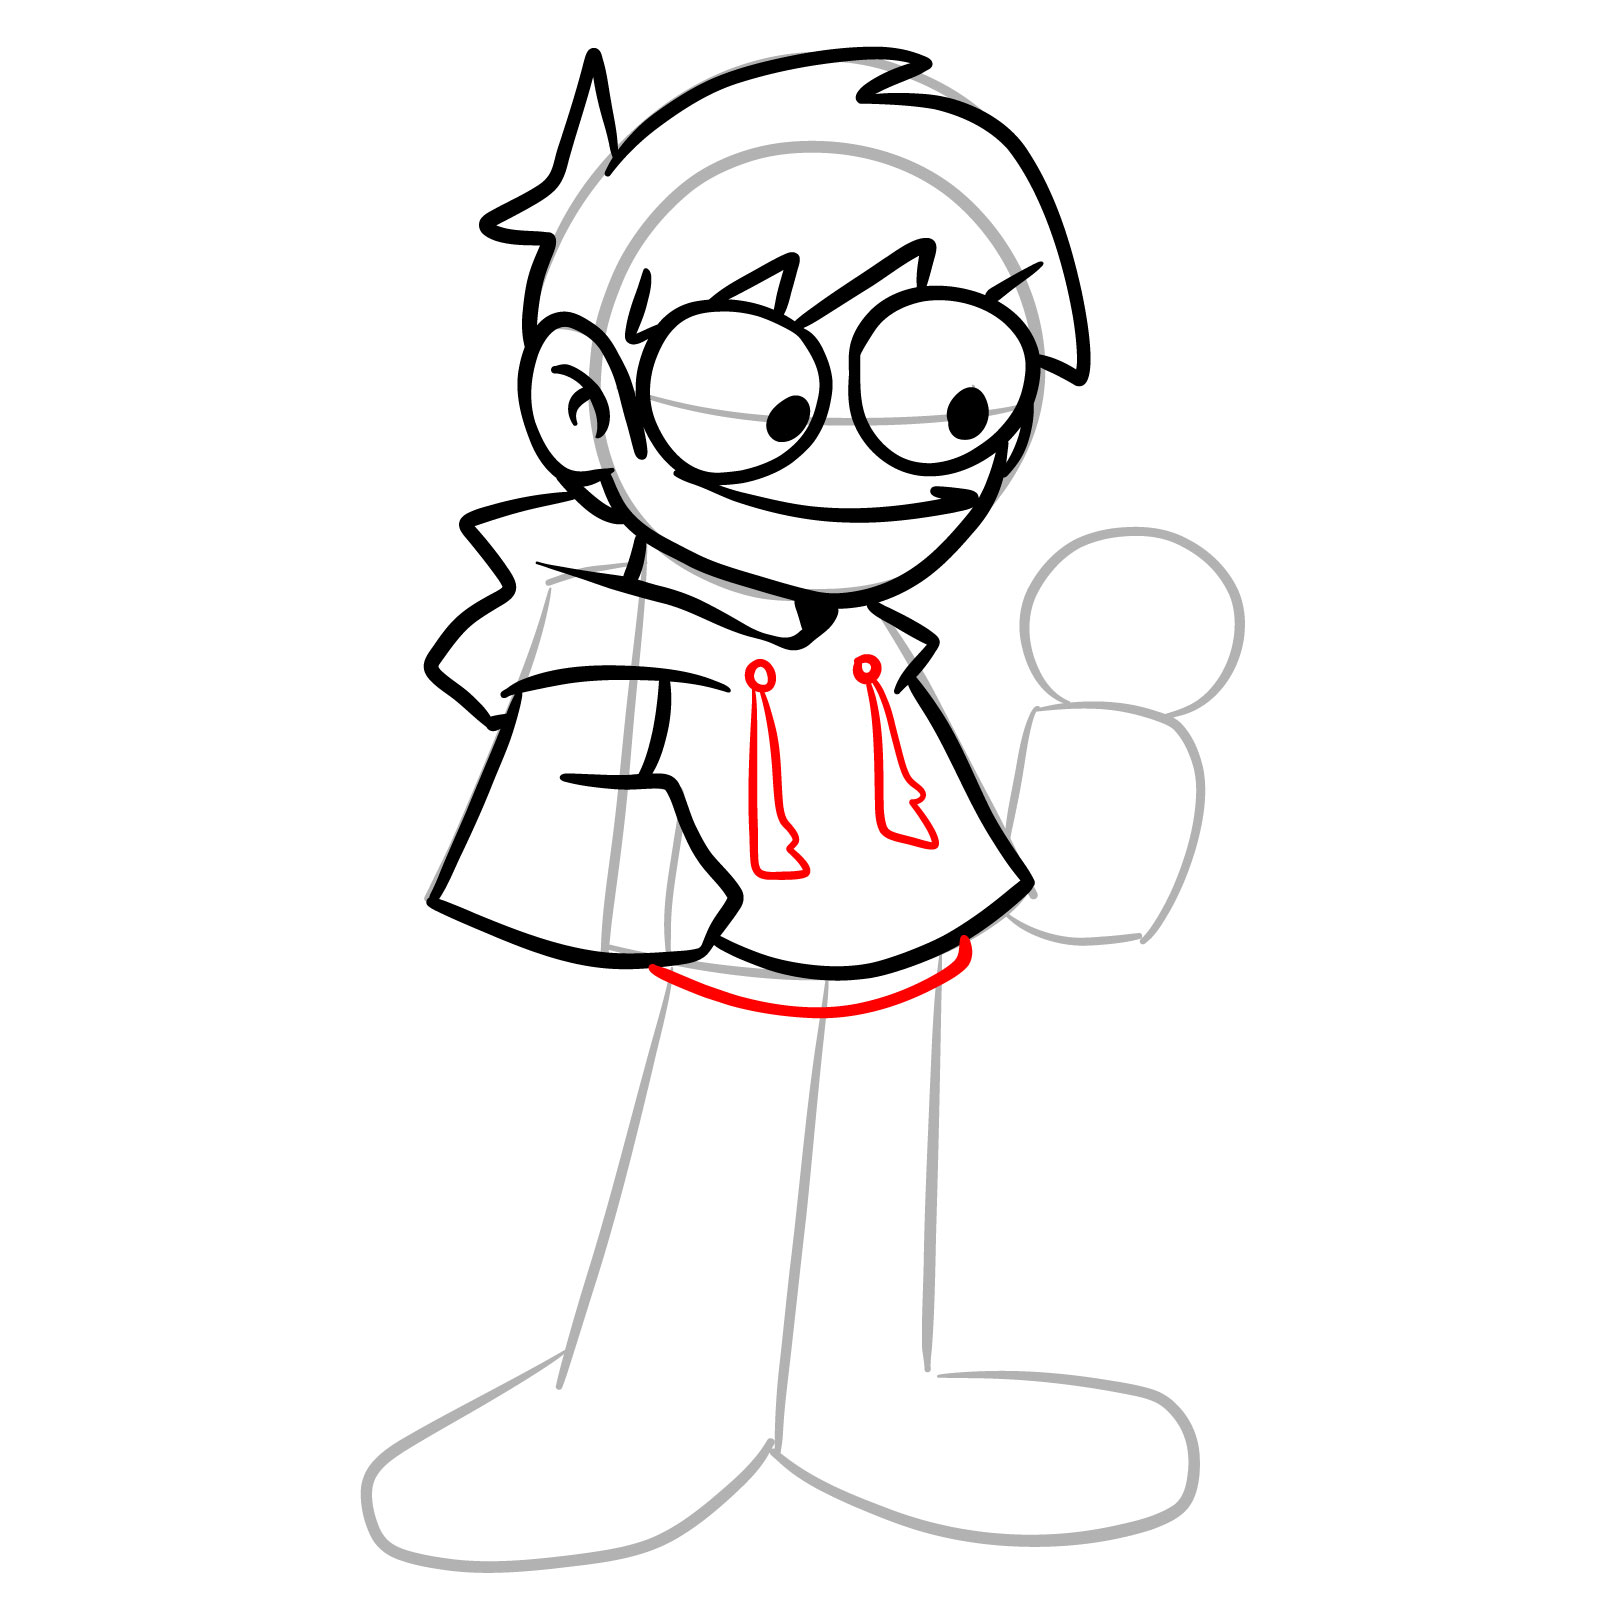 How to draw Edd from Online Vs - step 16